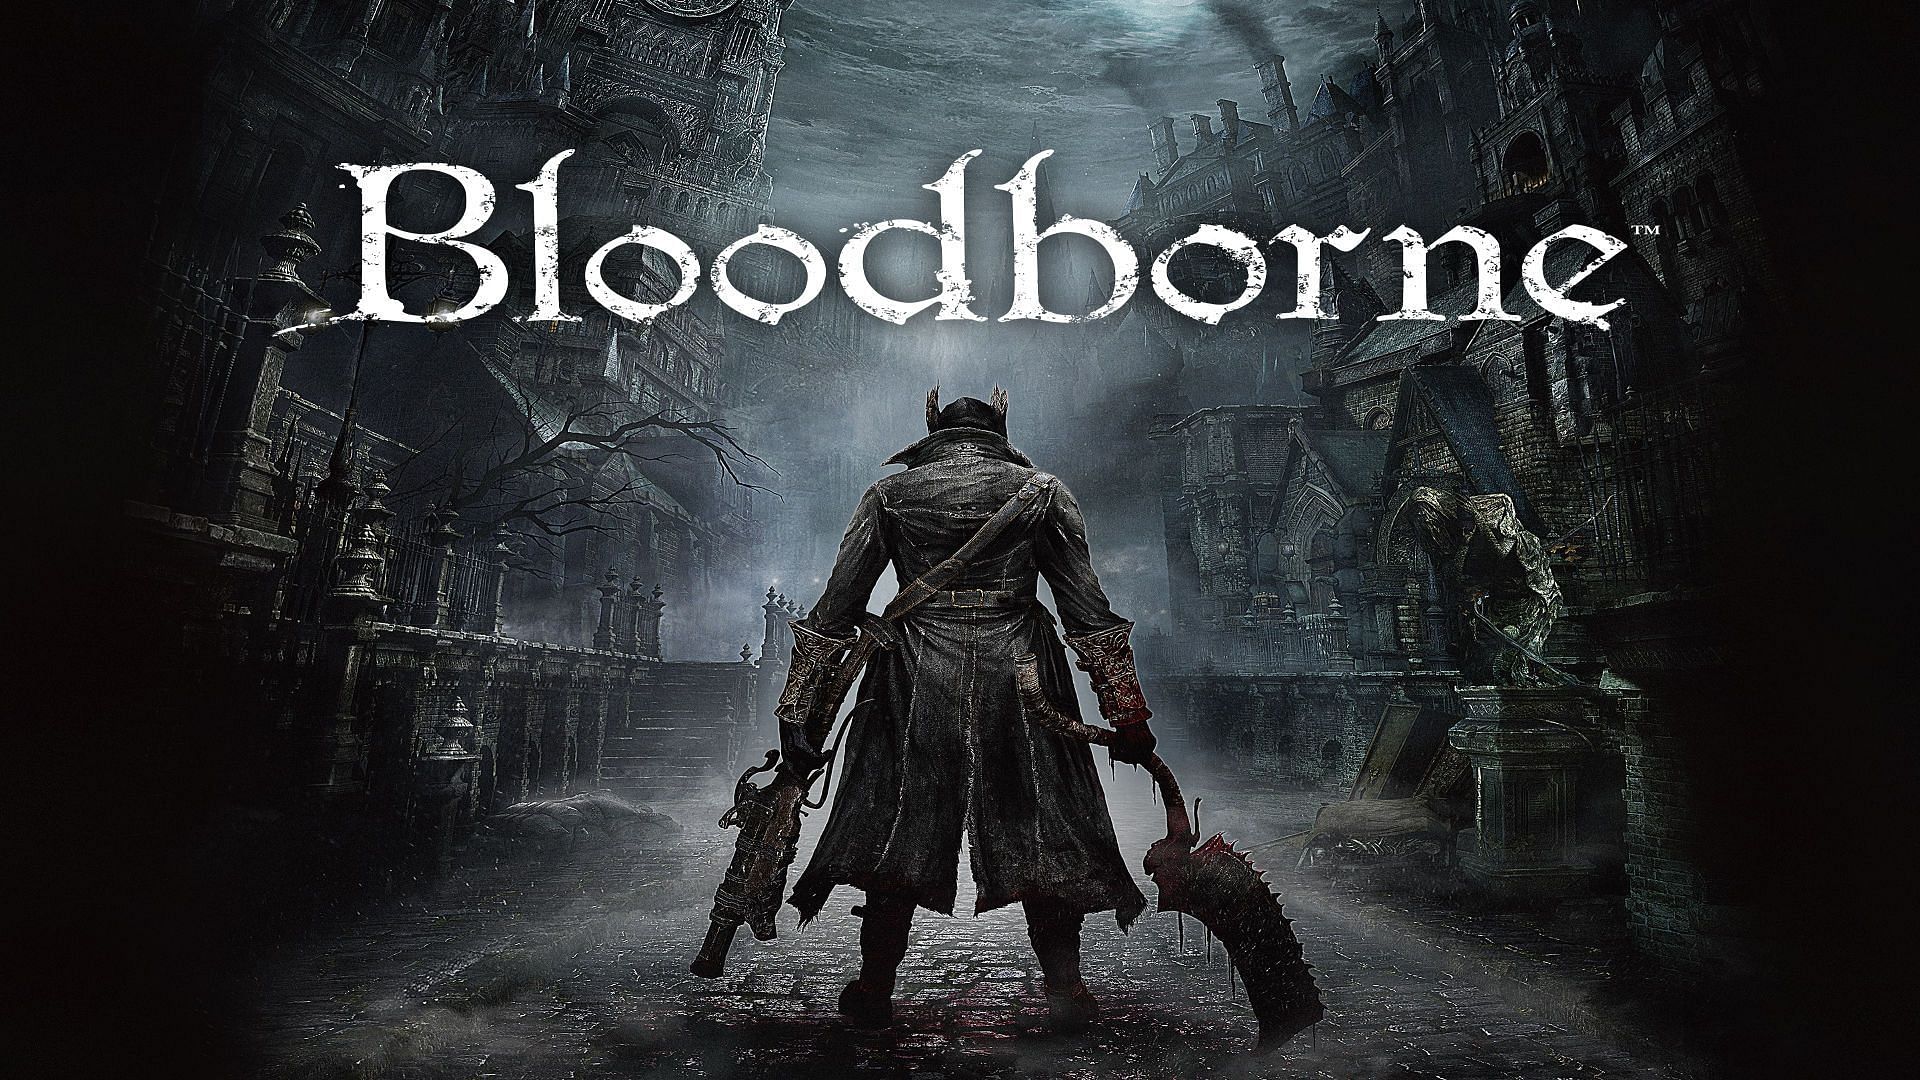 Is a next-gen patch for Bloodborne too much to ask for? (Image via Sony Computer Entertainment)